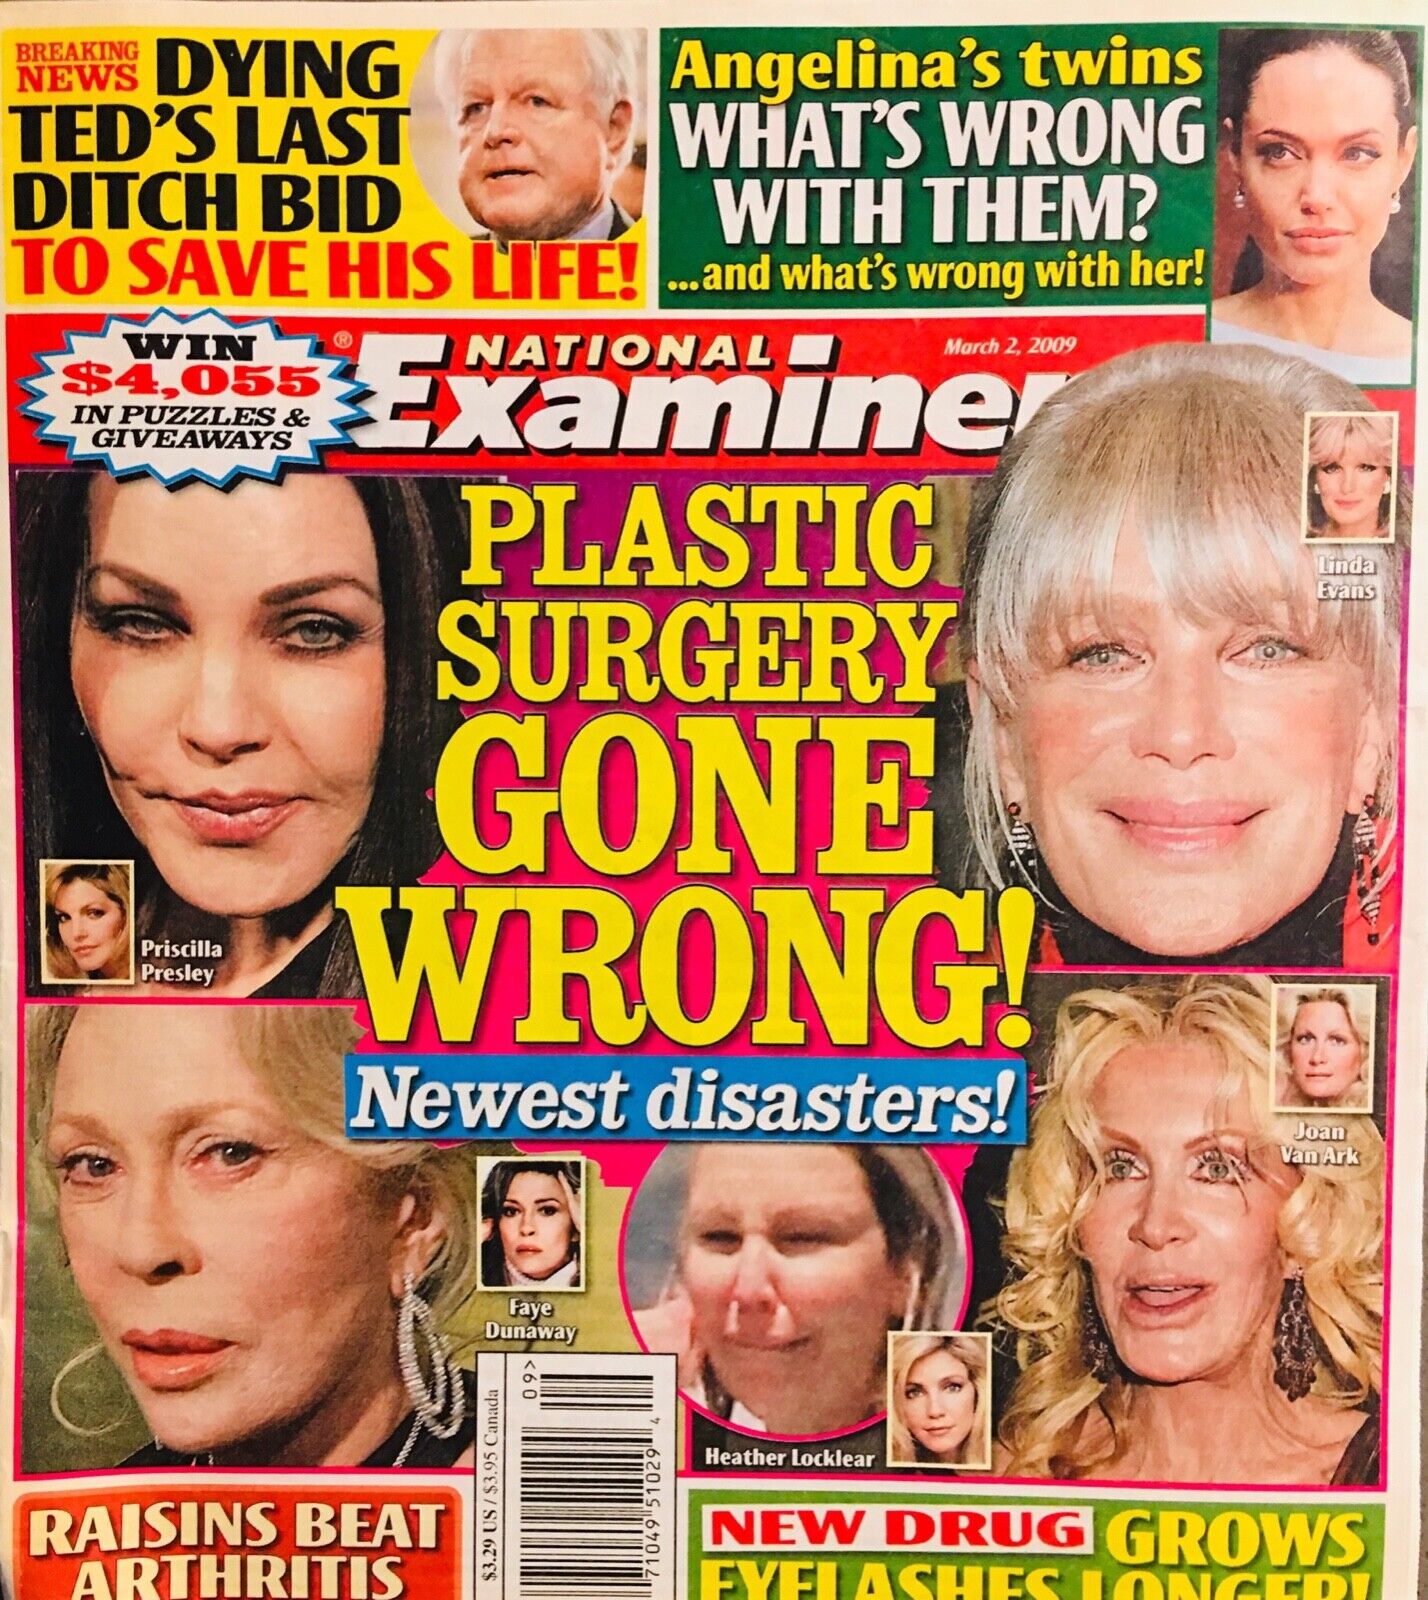 National Examiner March 2nd 2009 Plastic Surgery Gone Wrong